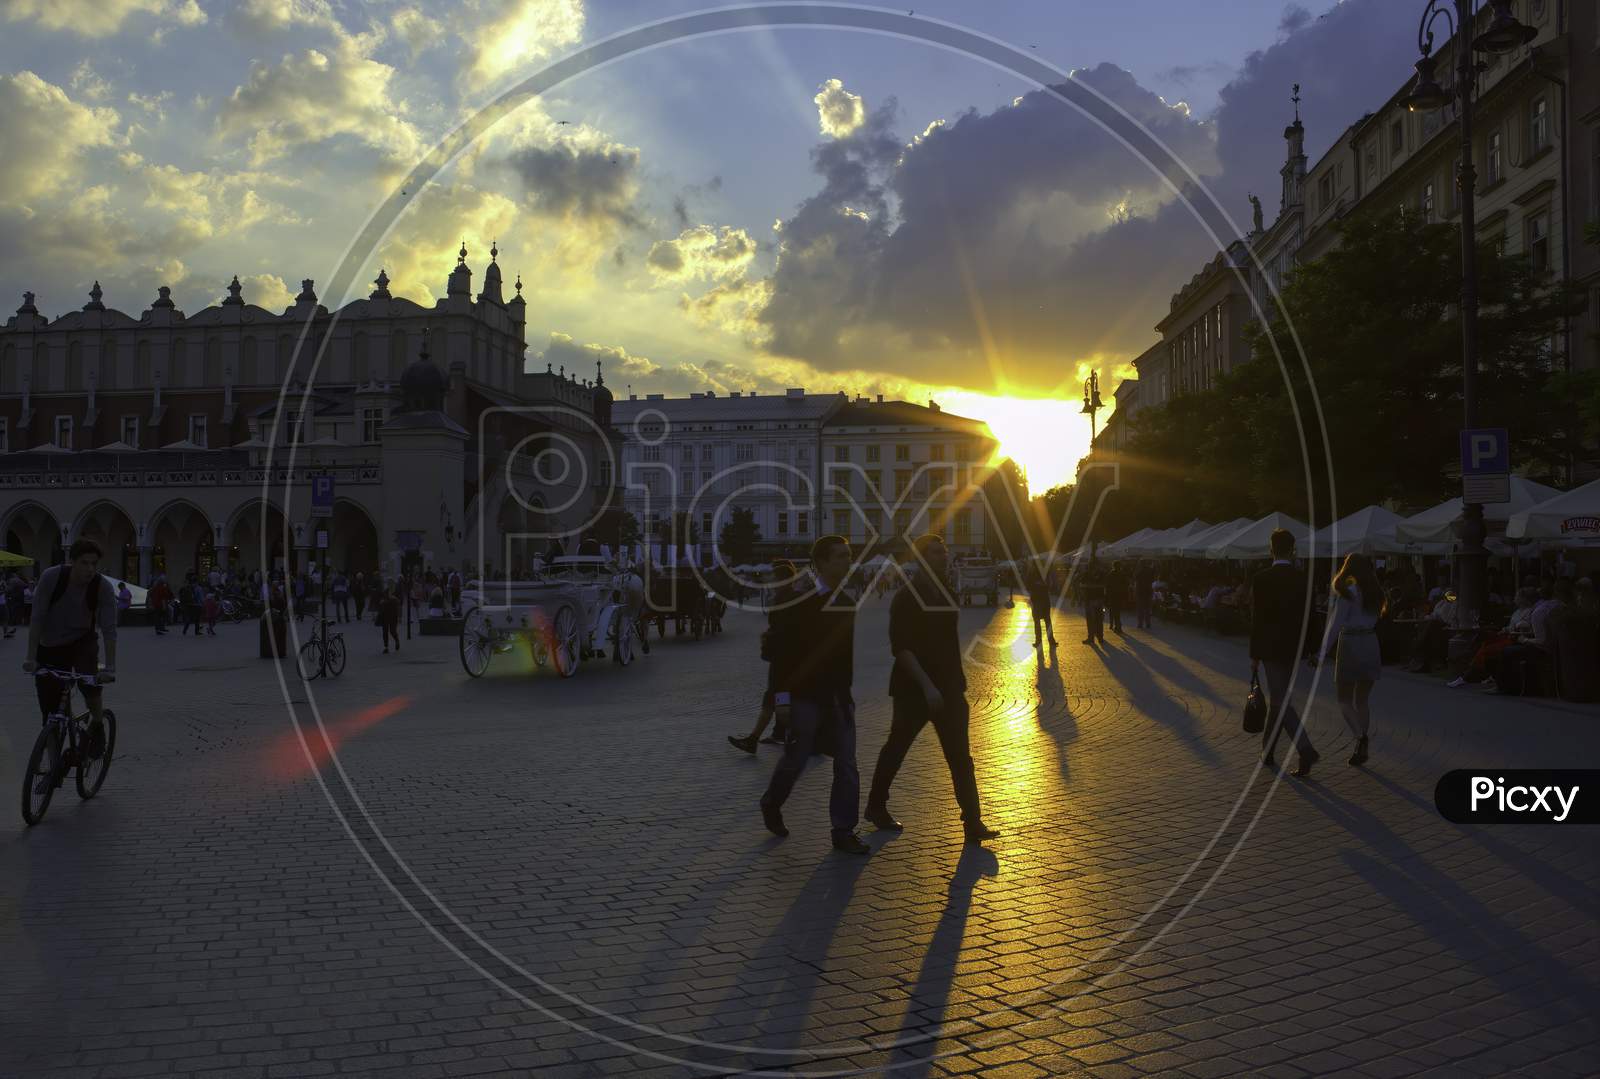 Krakow, Poland - May 23, 2014: A Wide Angle Street View Of Touristic Main Square At The Center Of Krakow City In Poland